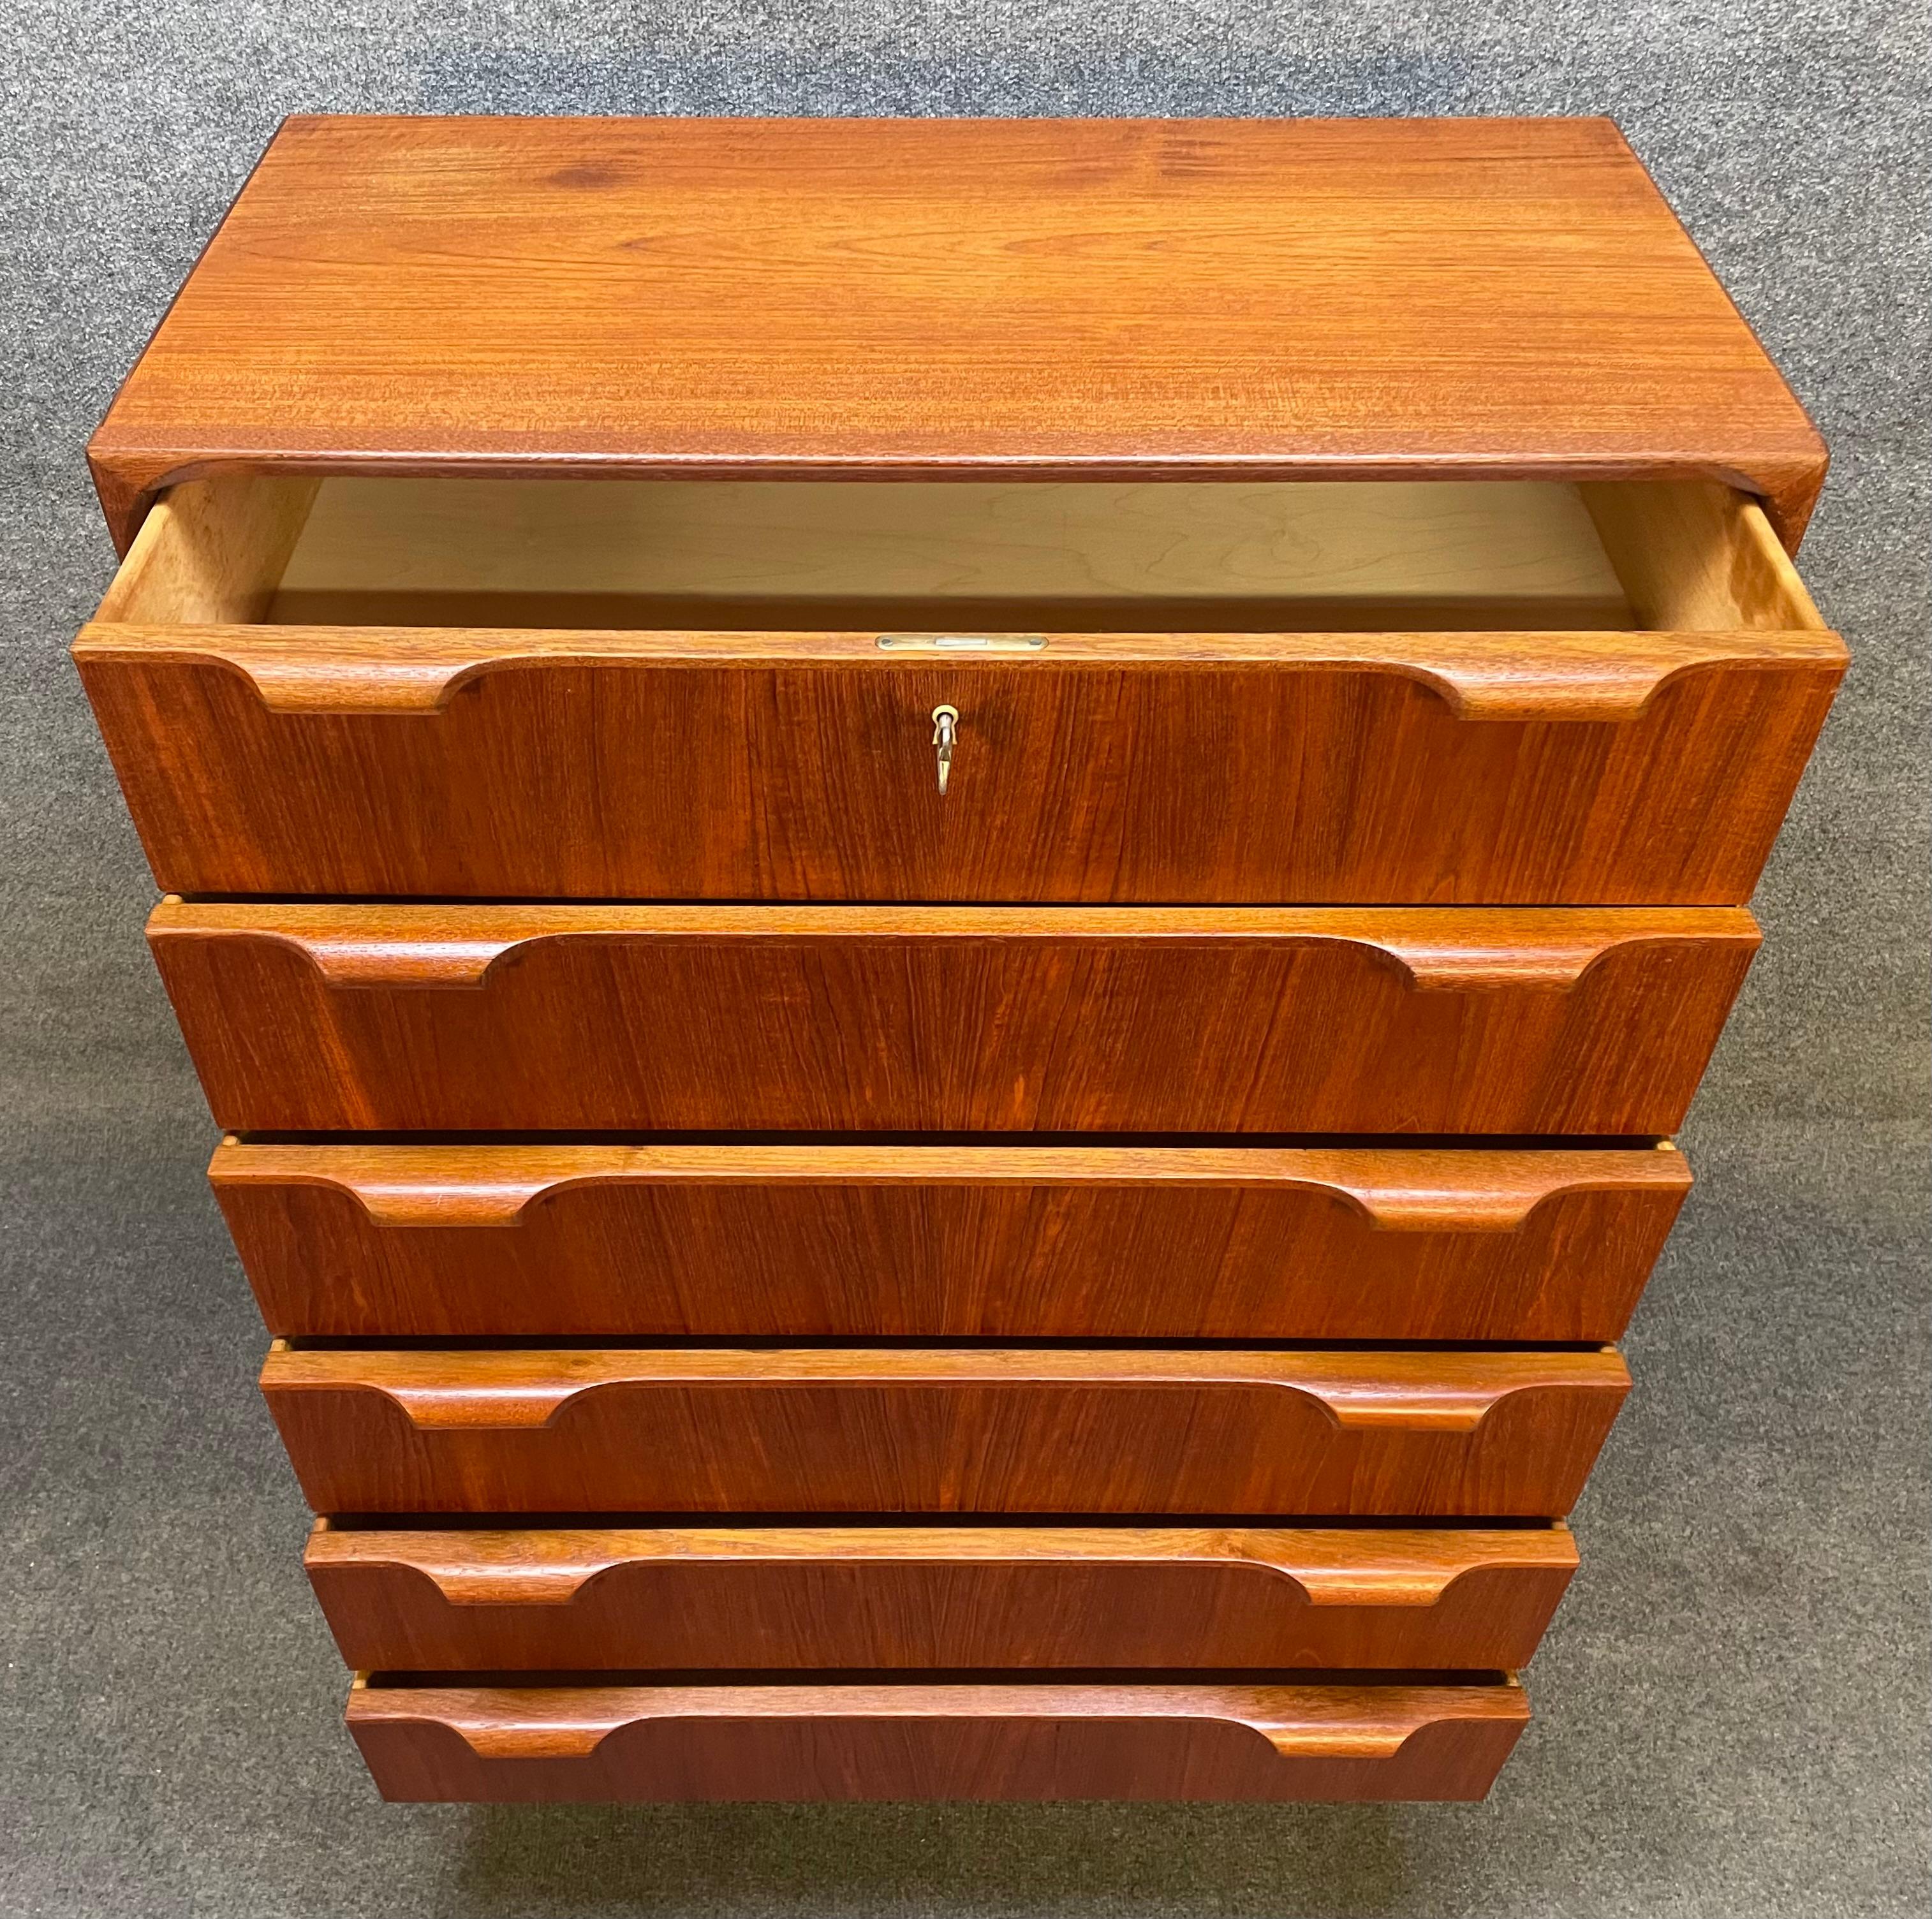 Here is a beautiful Scandinavian modern dresser in teak wood manufactured by Bernhard Pedersen Mobelfabrik in Denmark in the 1960's.
This beautiful chest of drawers, recently imported from Europe to California before its refinishing, features a